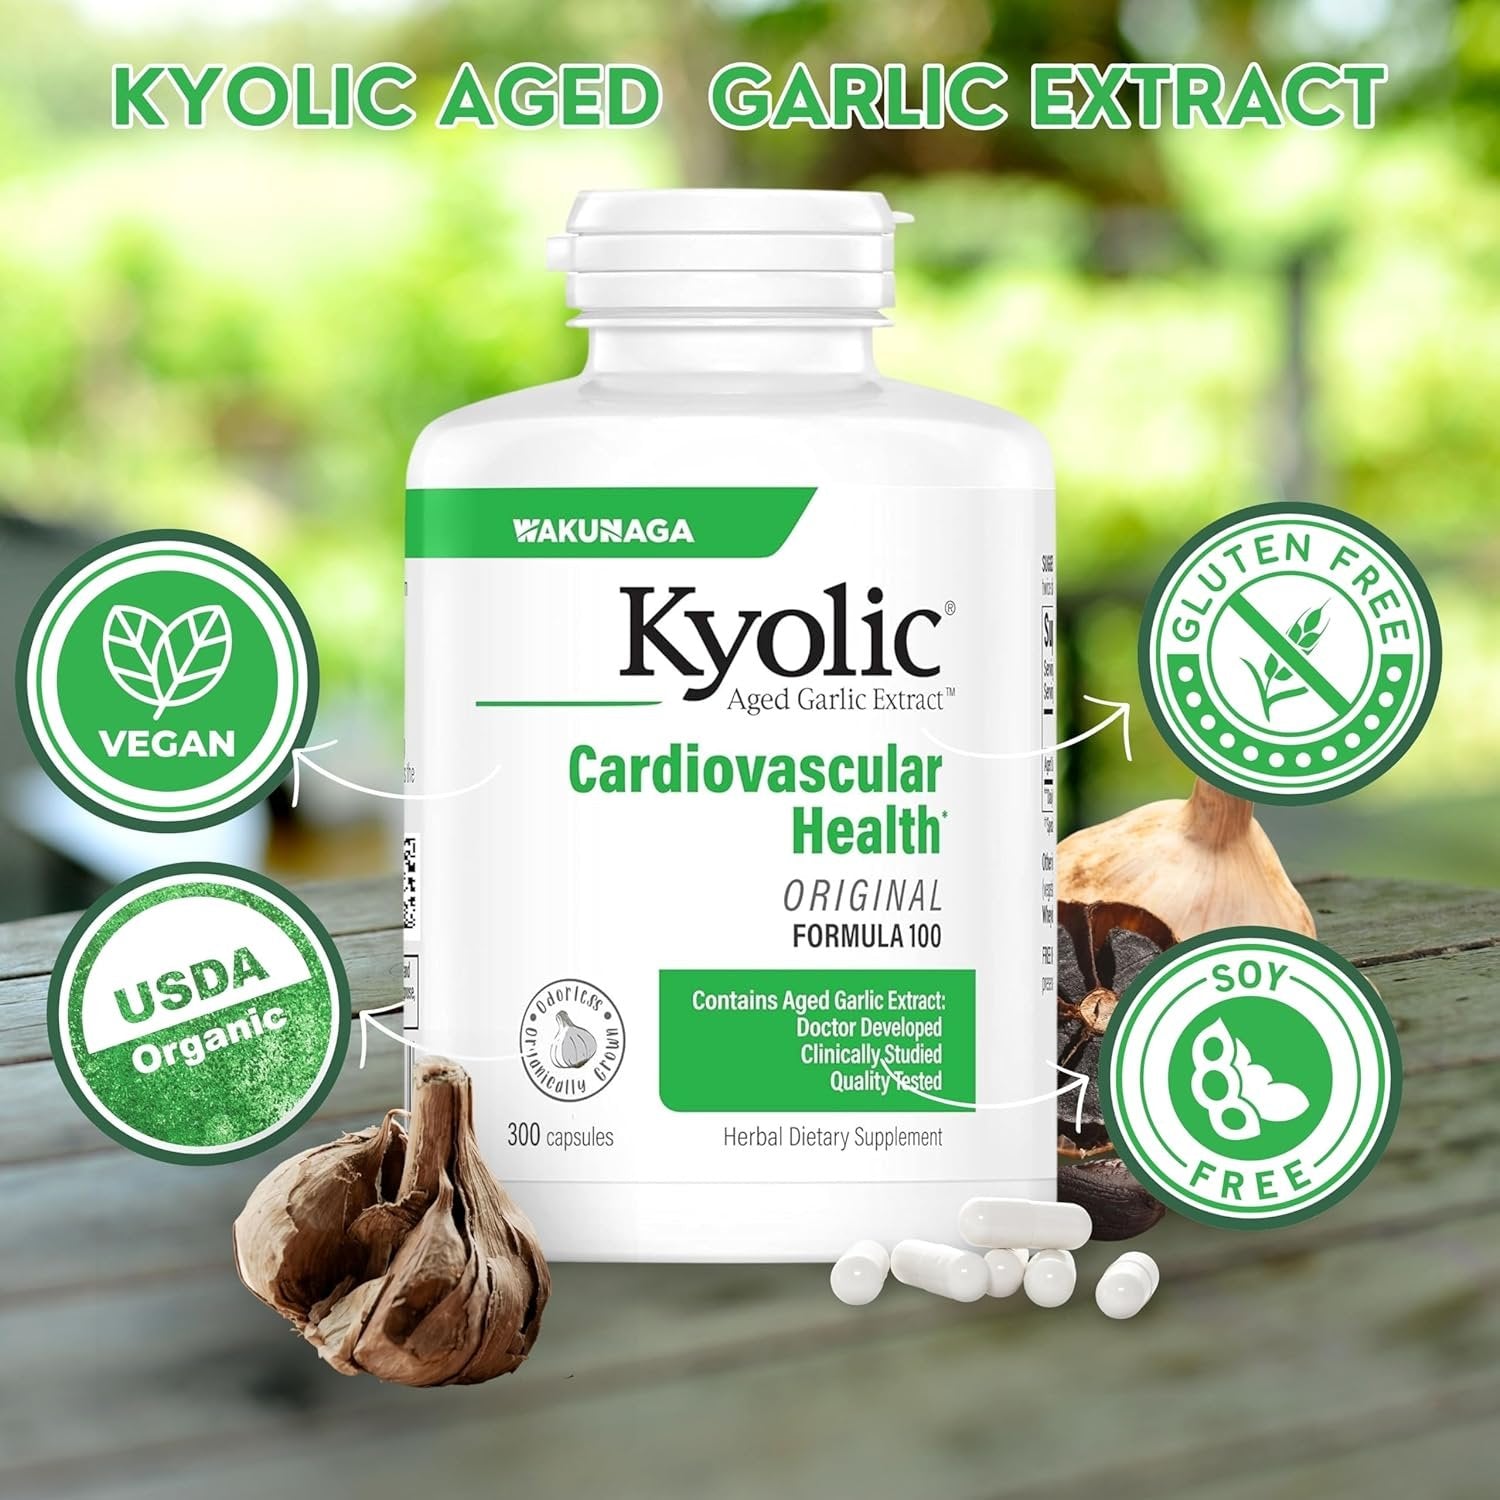 Kyolic Aged Garlic Extract Cleanse & Digestion Formula 102 - 200 Veggie Tablets